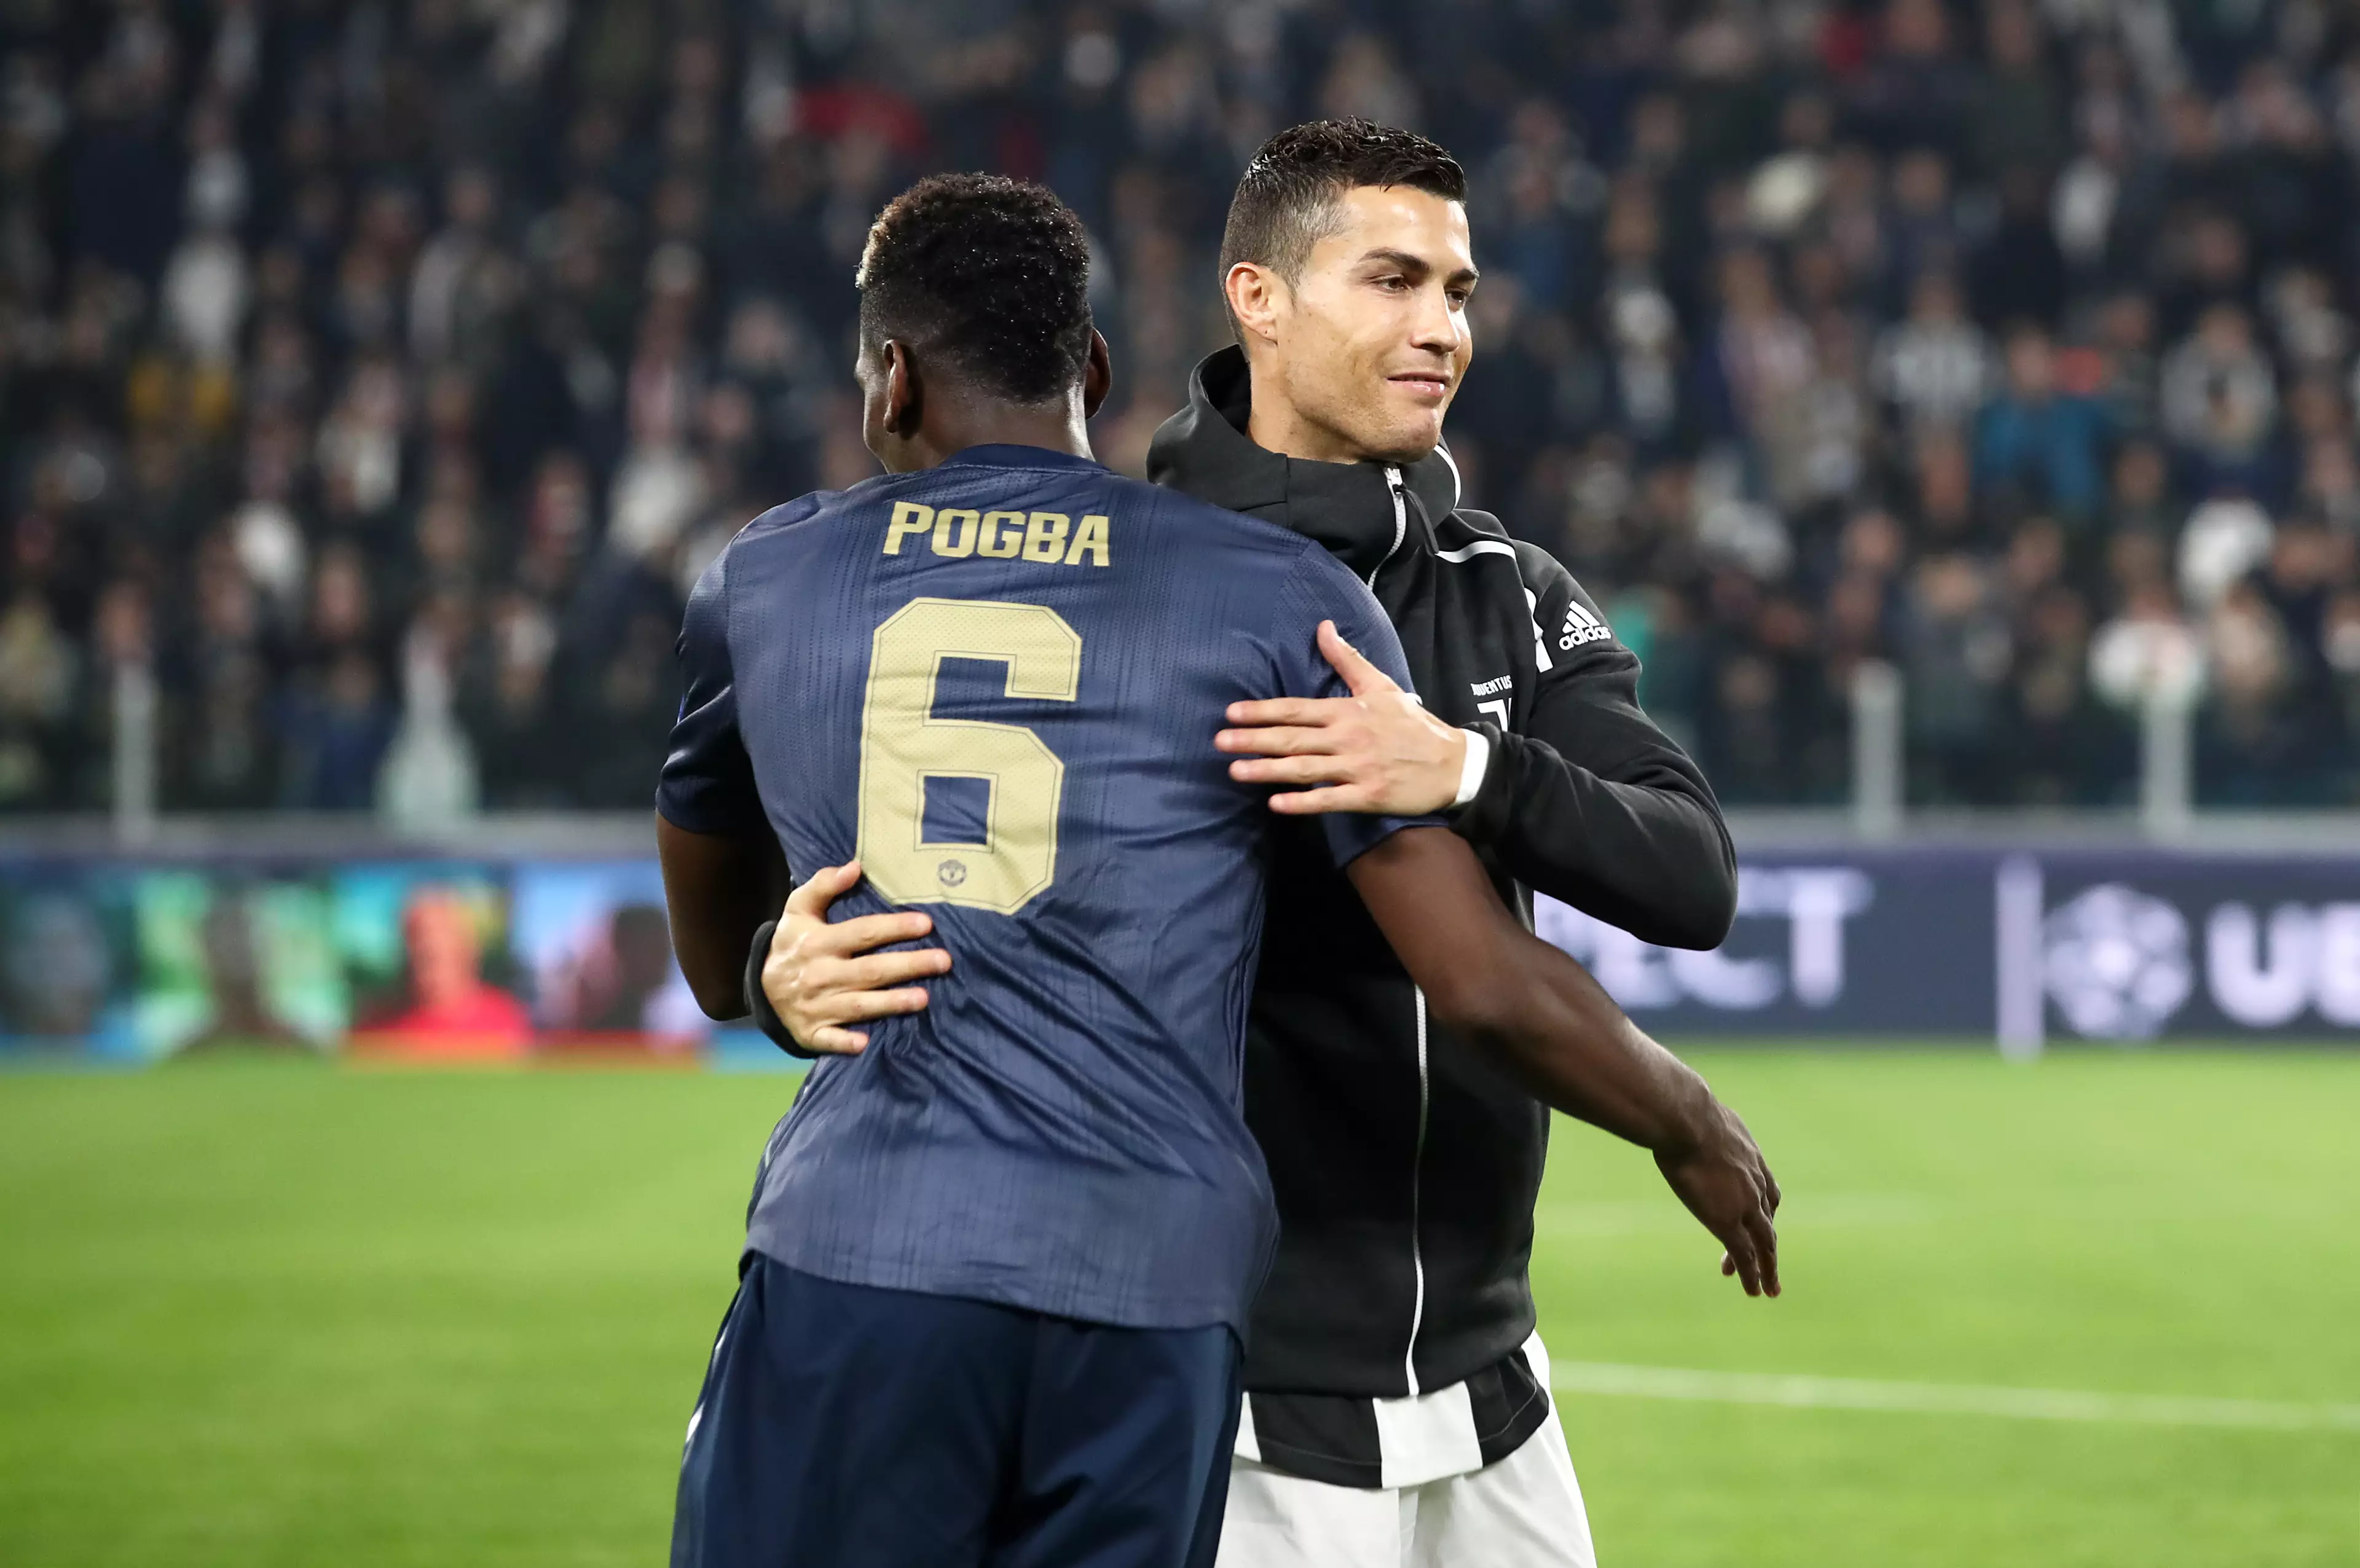 Could Ronaldo and Pogba swap clubs? Image: PA Images